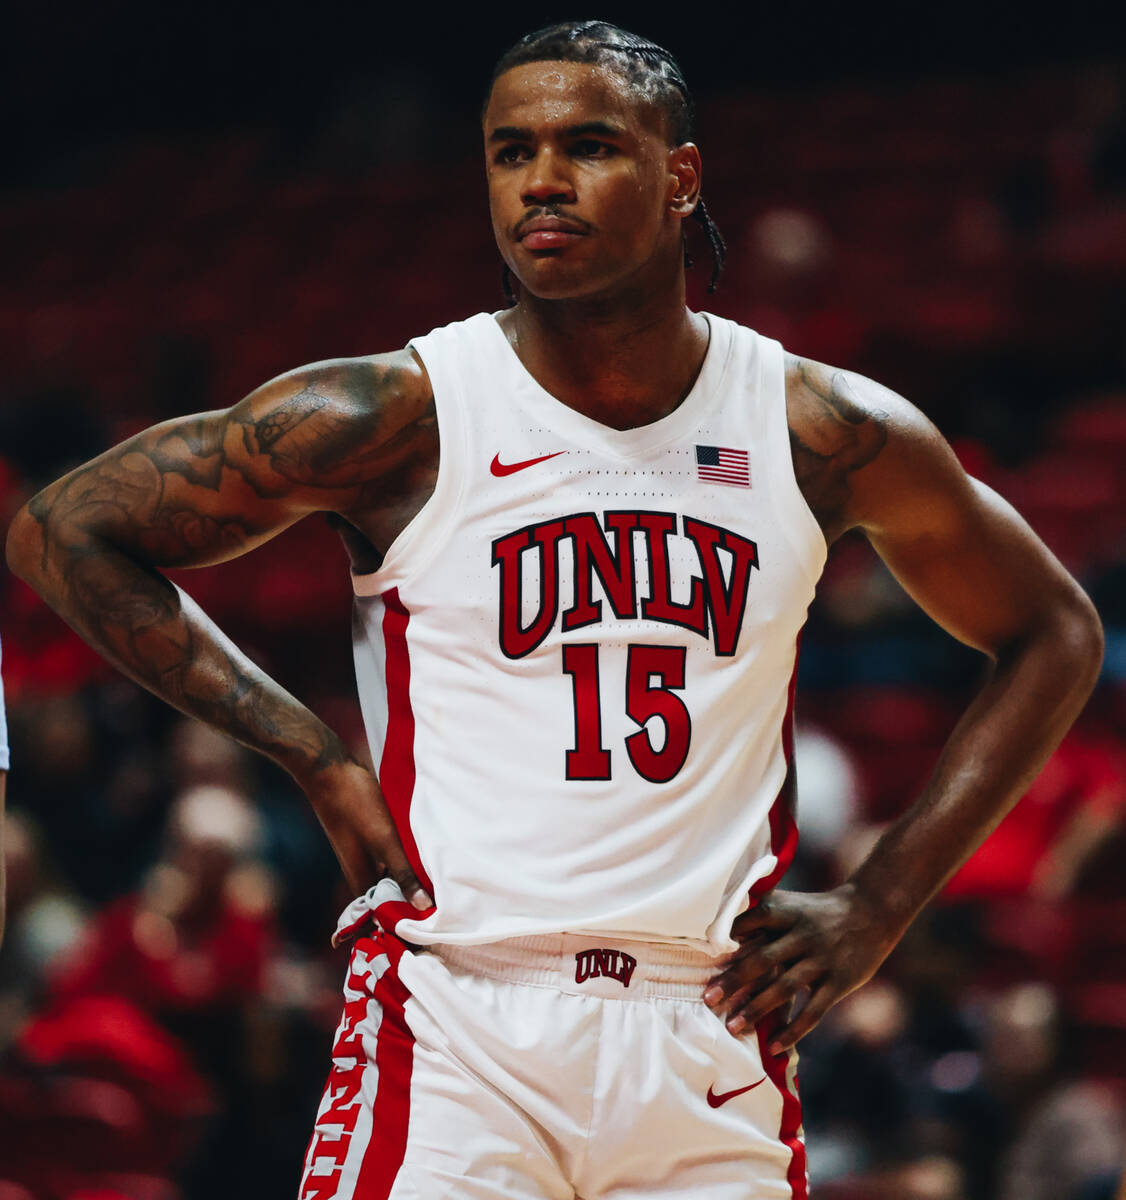 UNLV guard Luis Rodriguez (15) reacts as UNLV loses 85-71 to Southern during a game at Thomas & ...